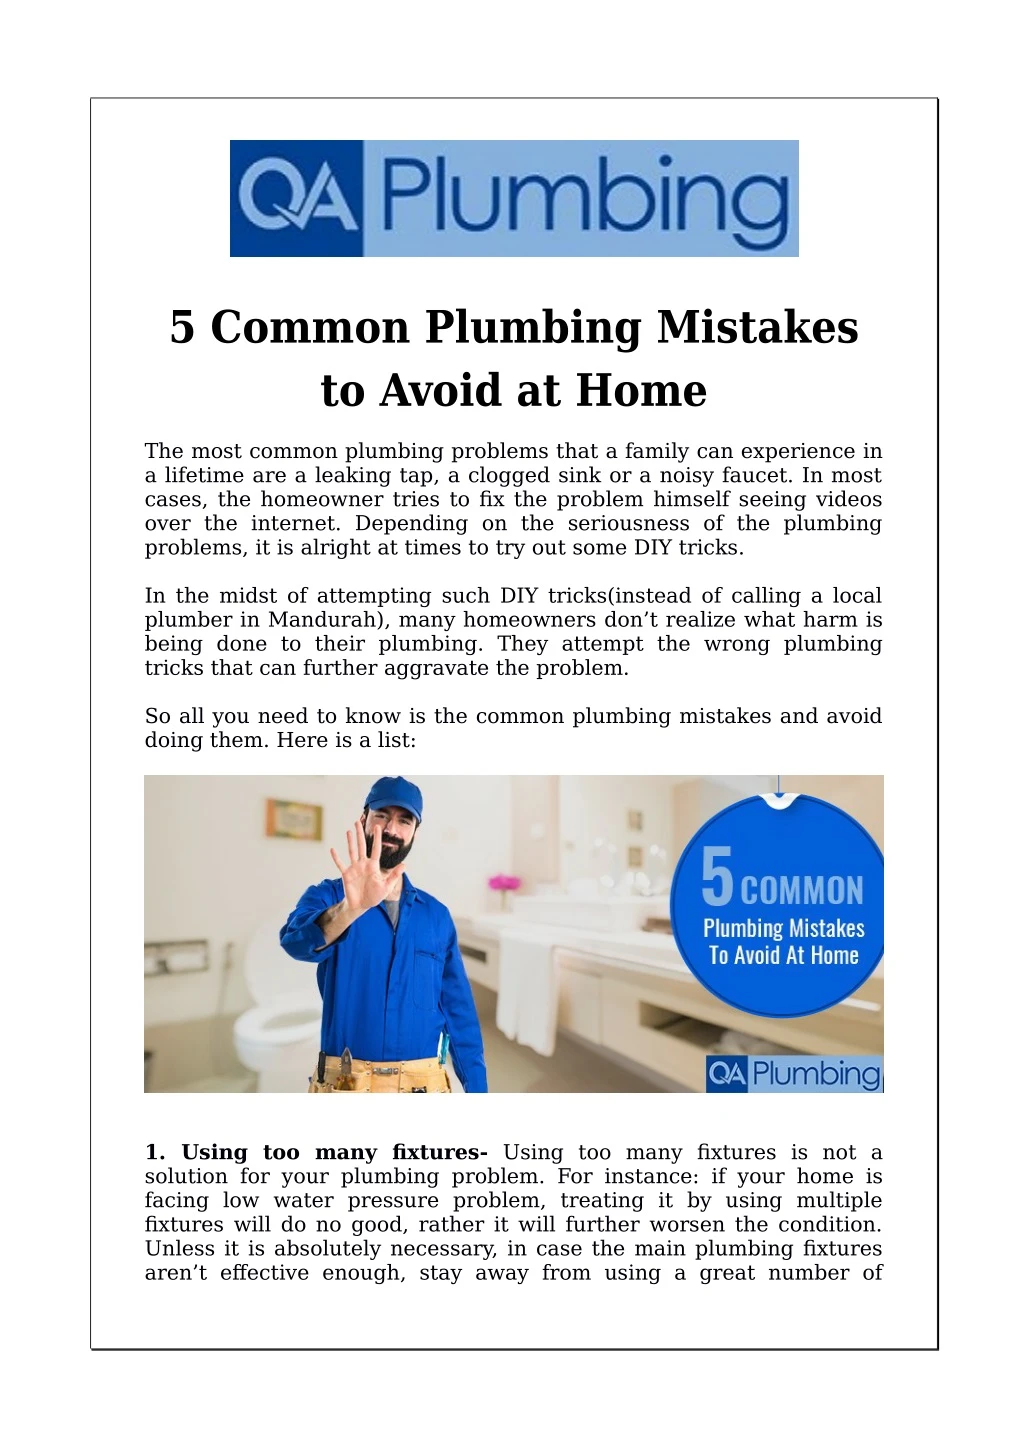 5 common plumbing mistakes to avoid at home